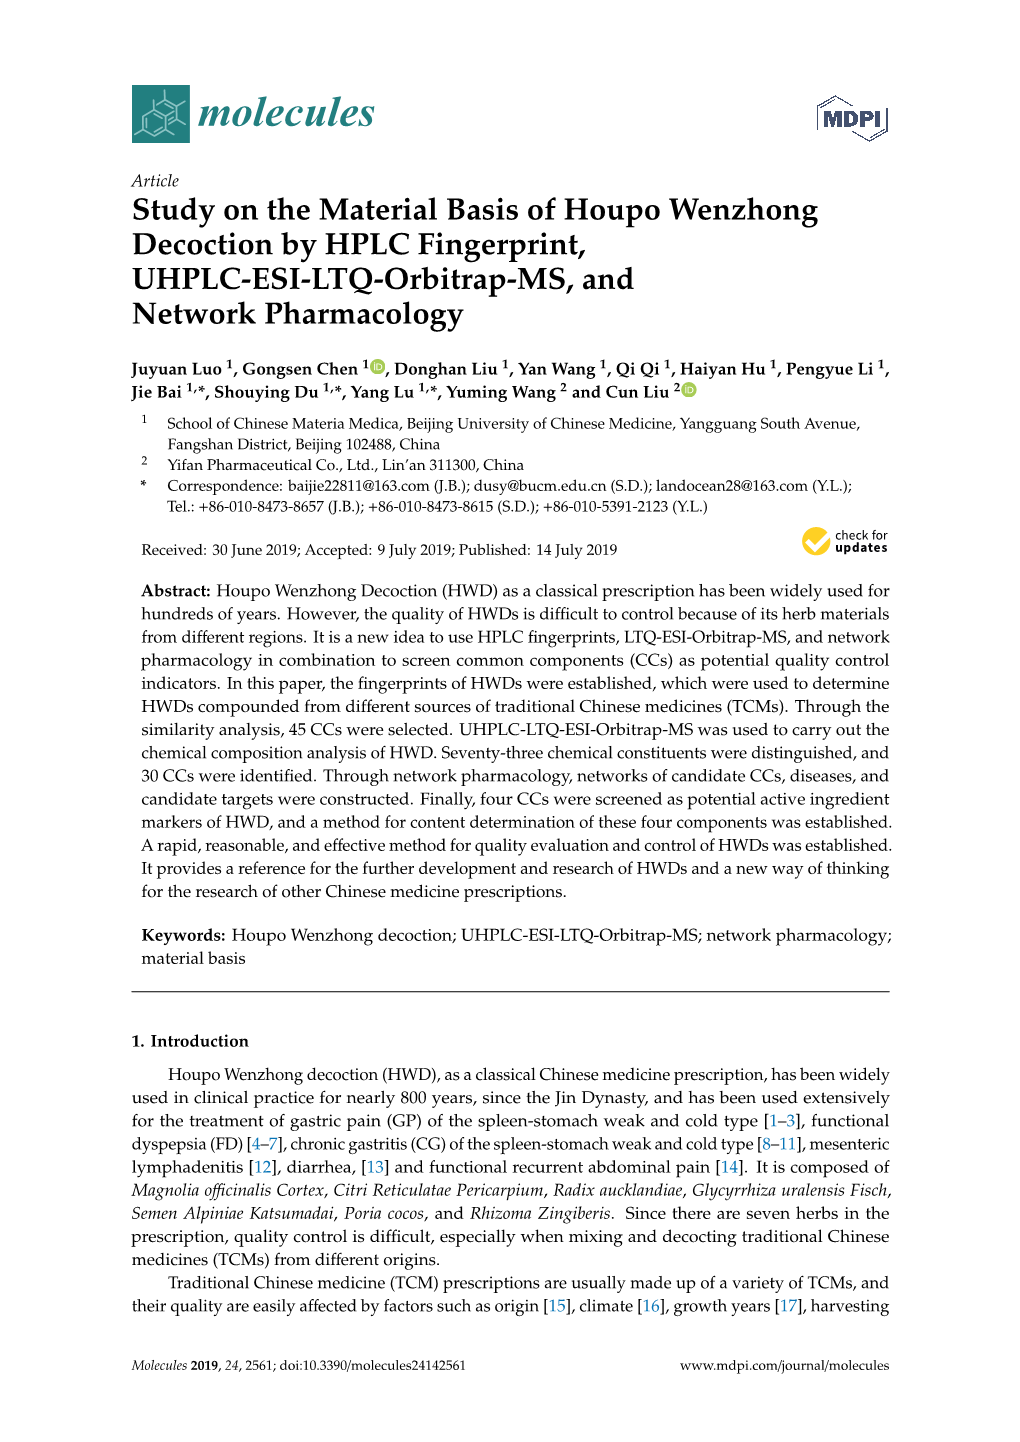 Study on the Material Basis of Houpo Wenzhong Decoction by HPLC Fingerprint, UHPLC-ESI-LTQ-Orbitrap-MS, and Network Pharmacology